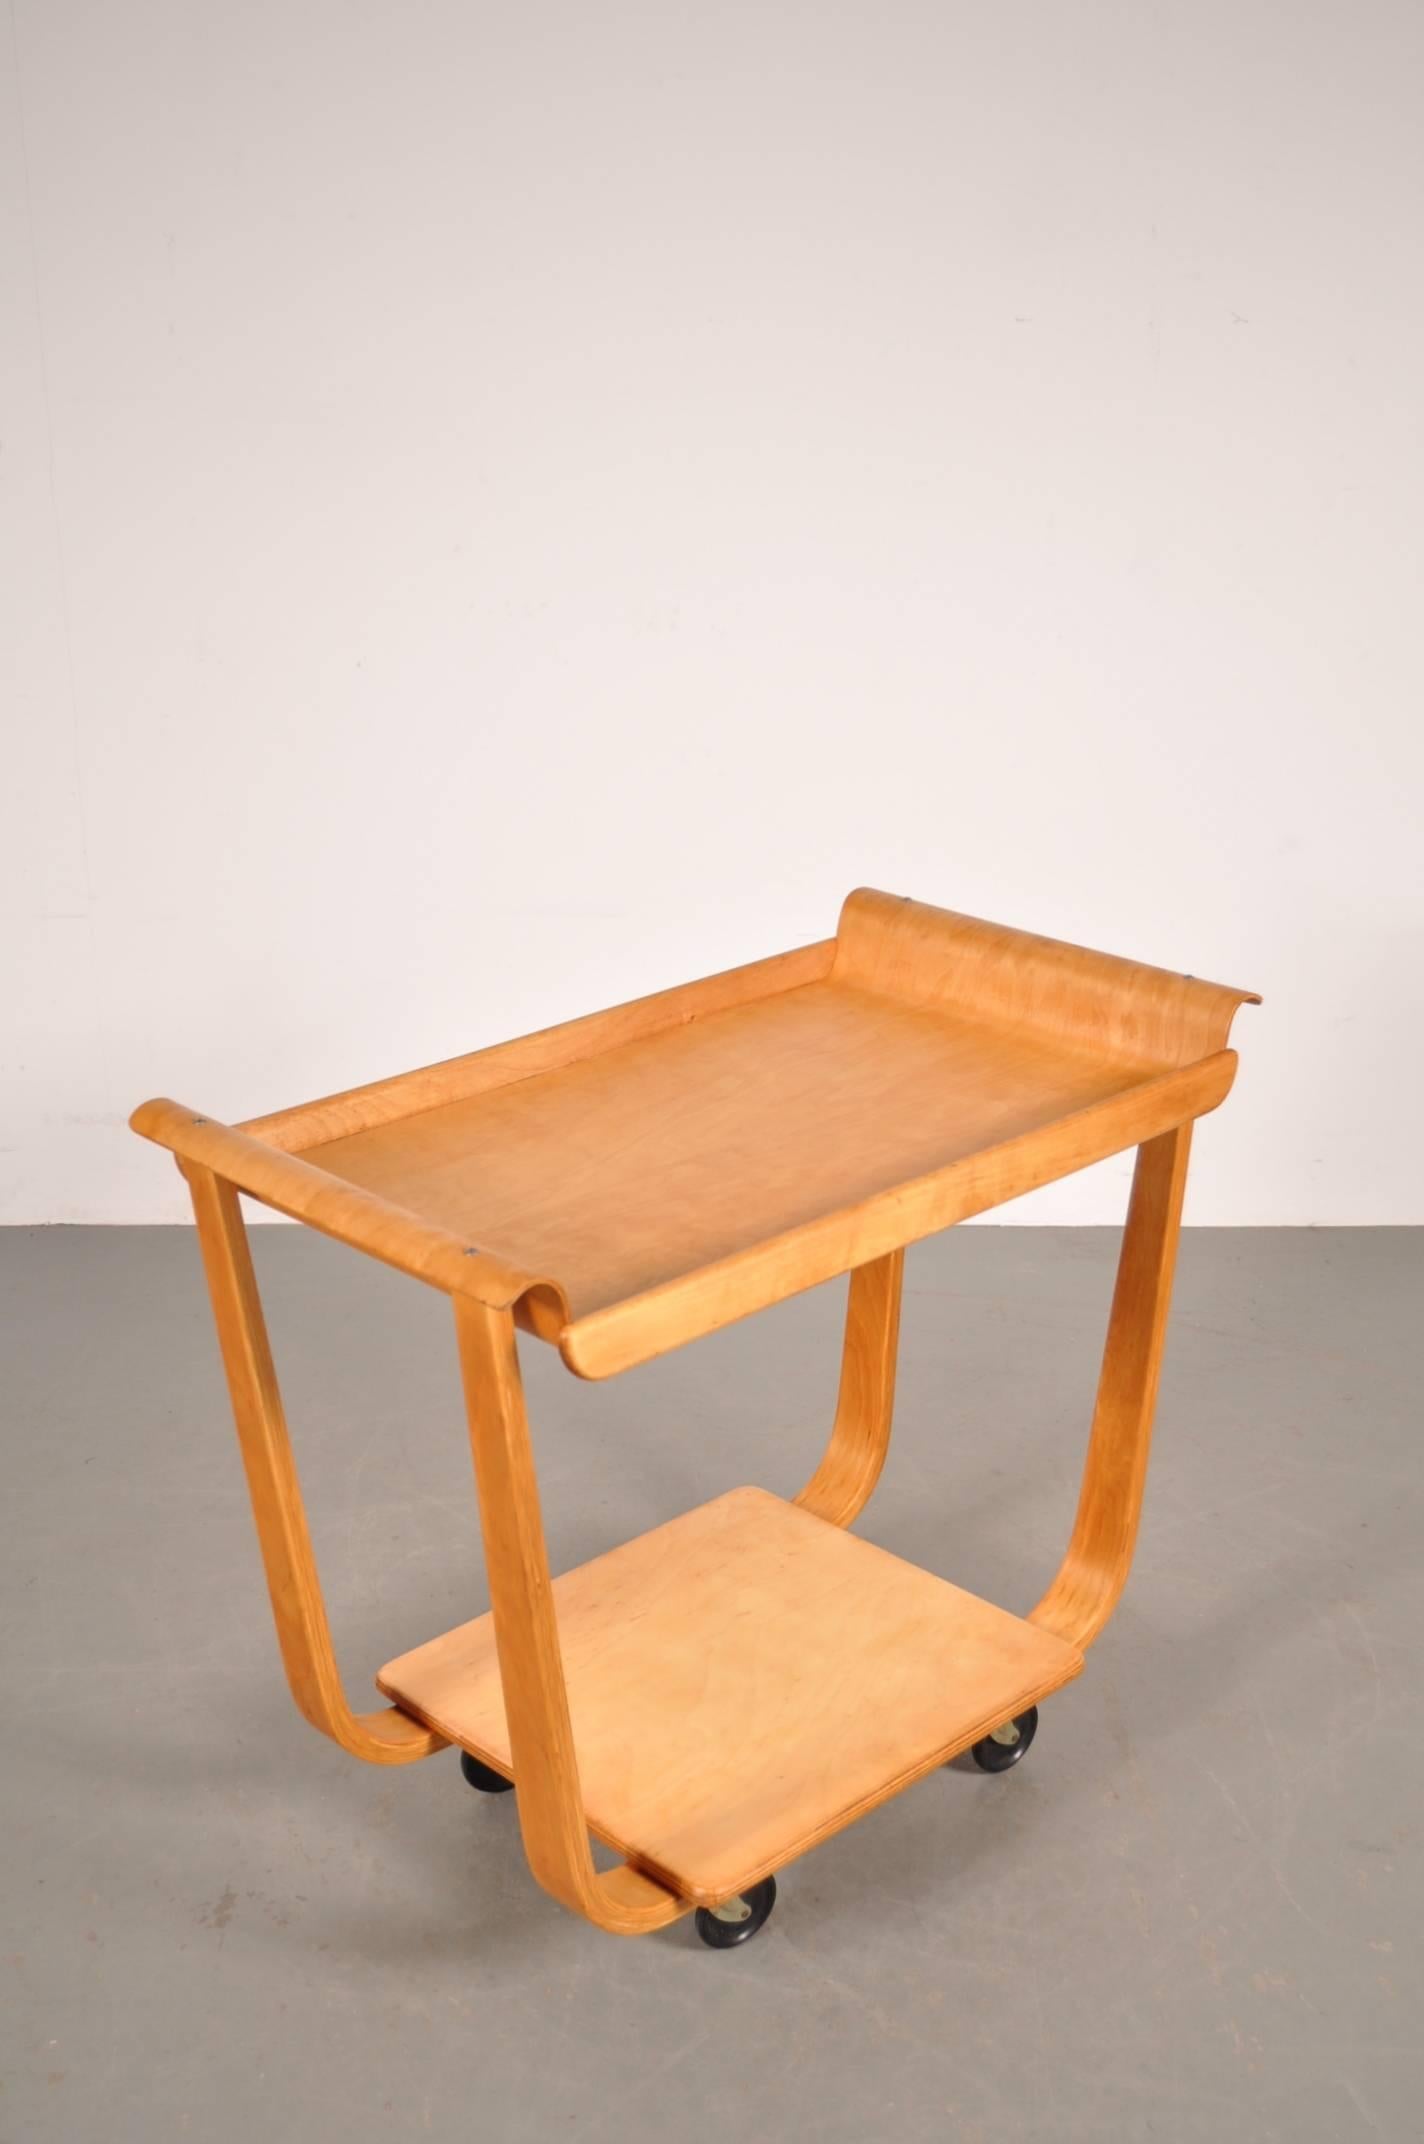 Dutch PB01 Trolley by Cees Braakman for Pastoe, Netherlands, circa 1950